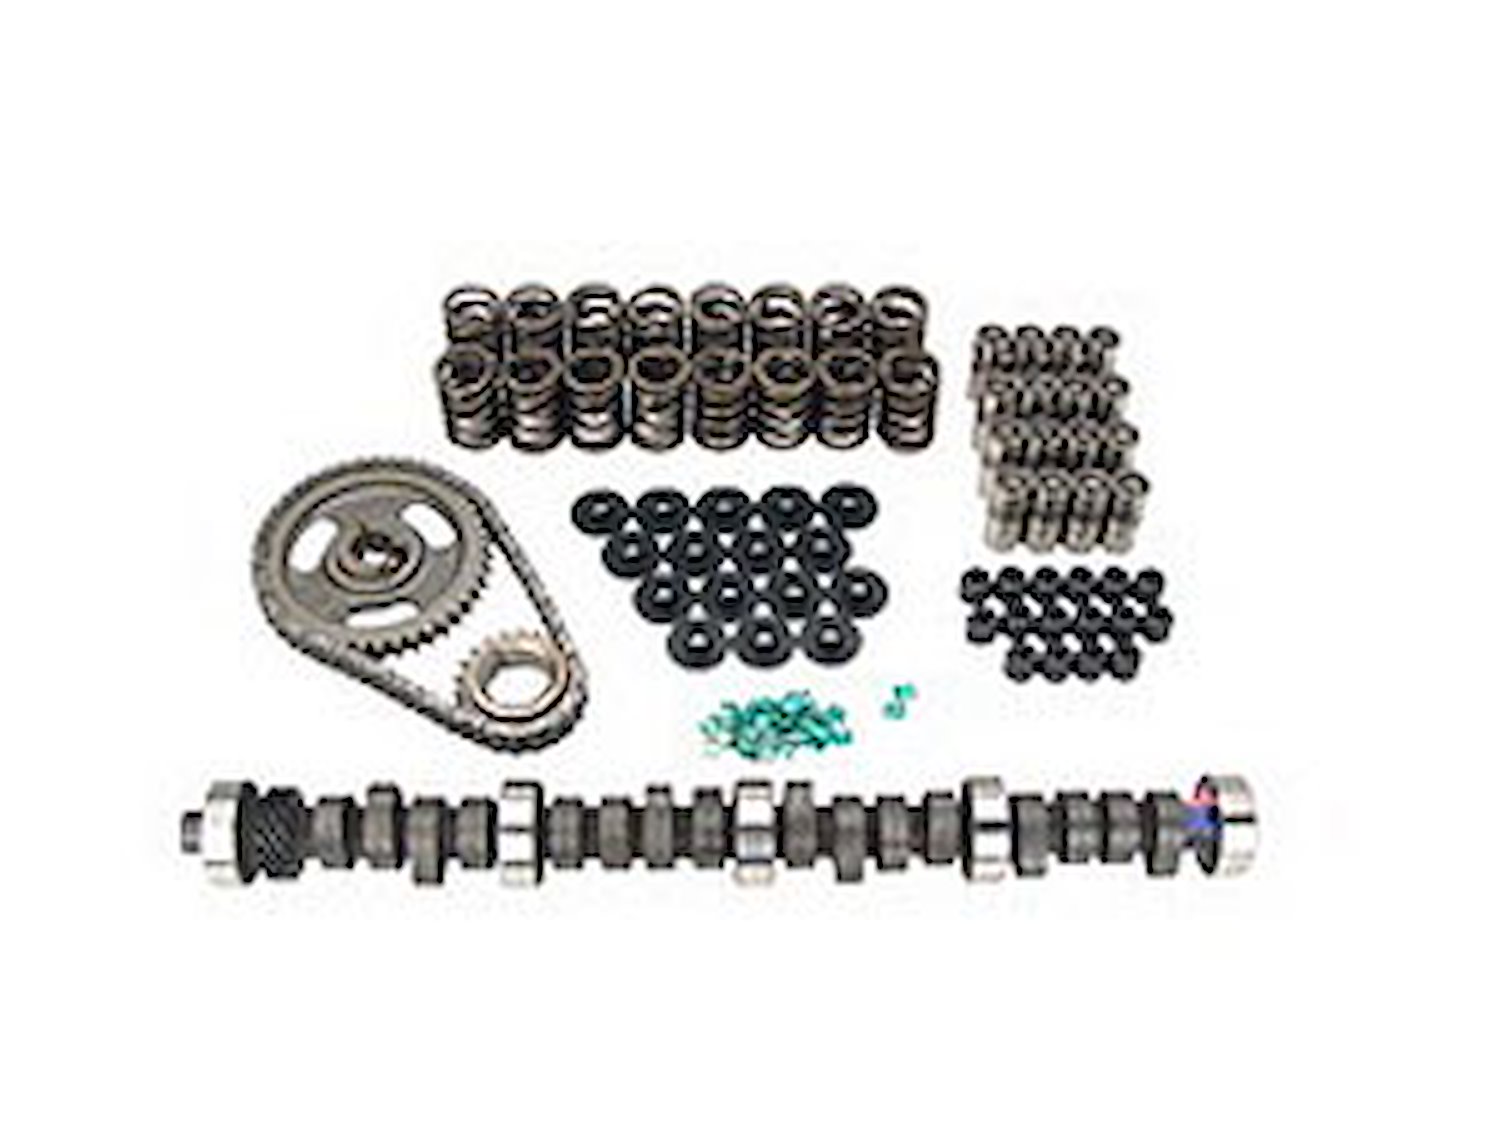 Xtreme Energy 274H Hydraulic Flat Tappet Camshaft Complete Kit Lift .562"/.565" Duration 274°/286° RPM Range 2000-6000